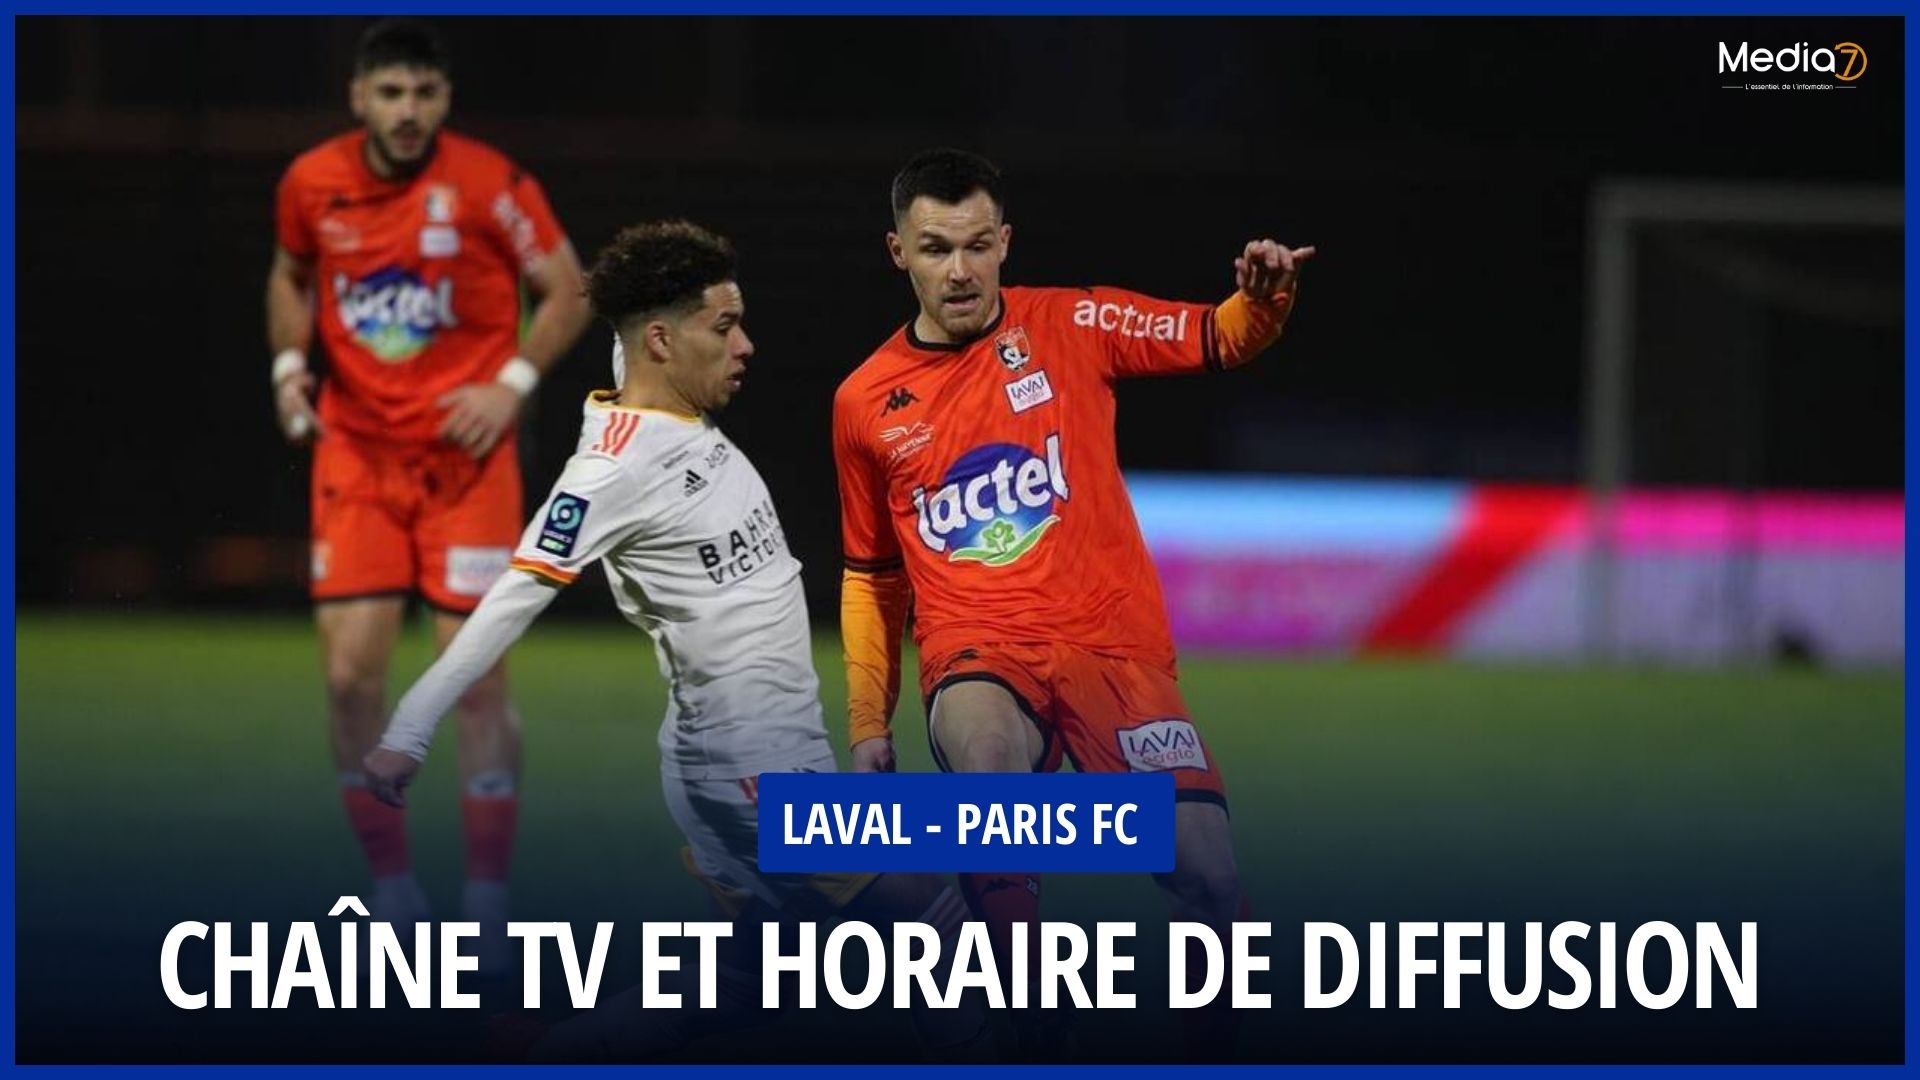 Match Laval - Paris FC Live: TV Channel and Broadcast Time - Media7